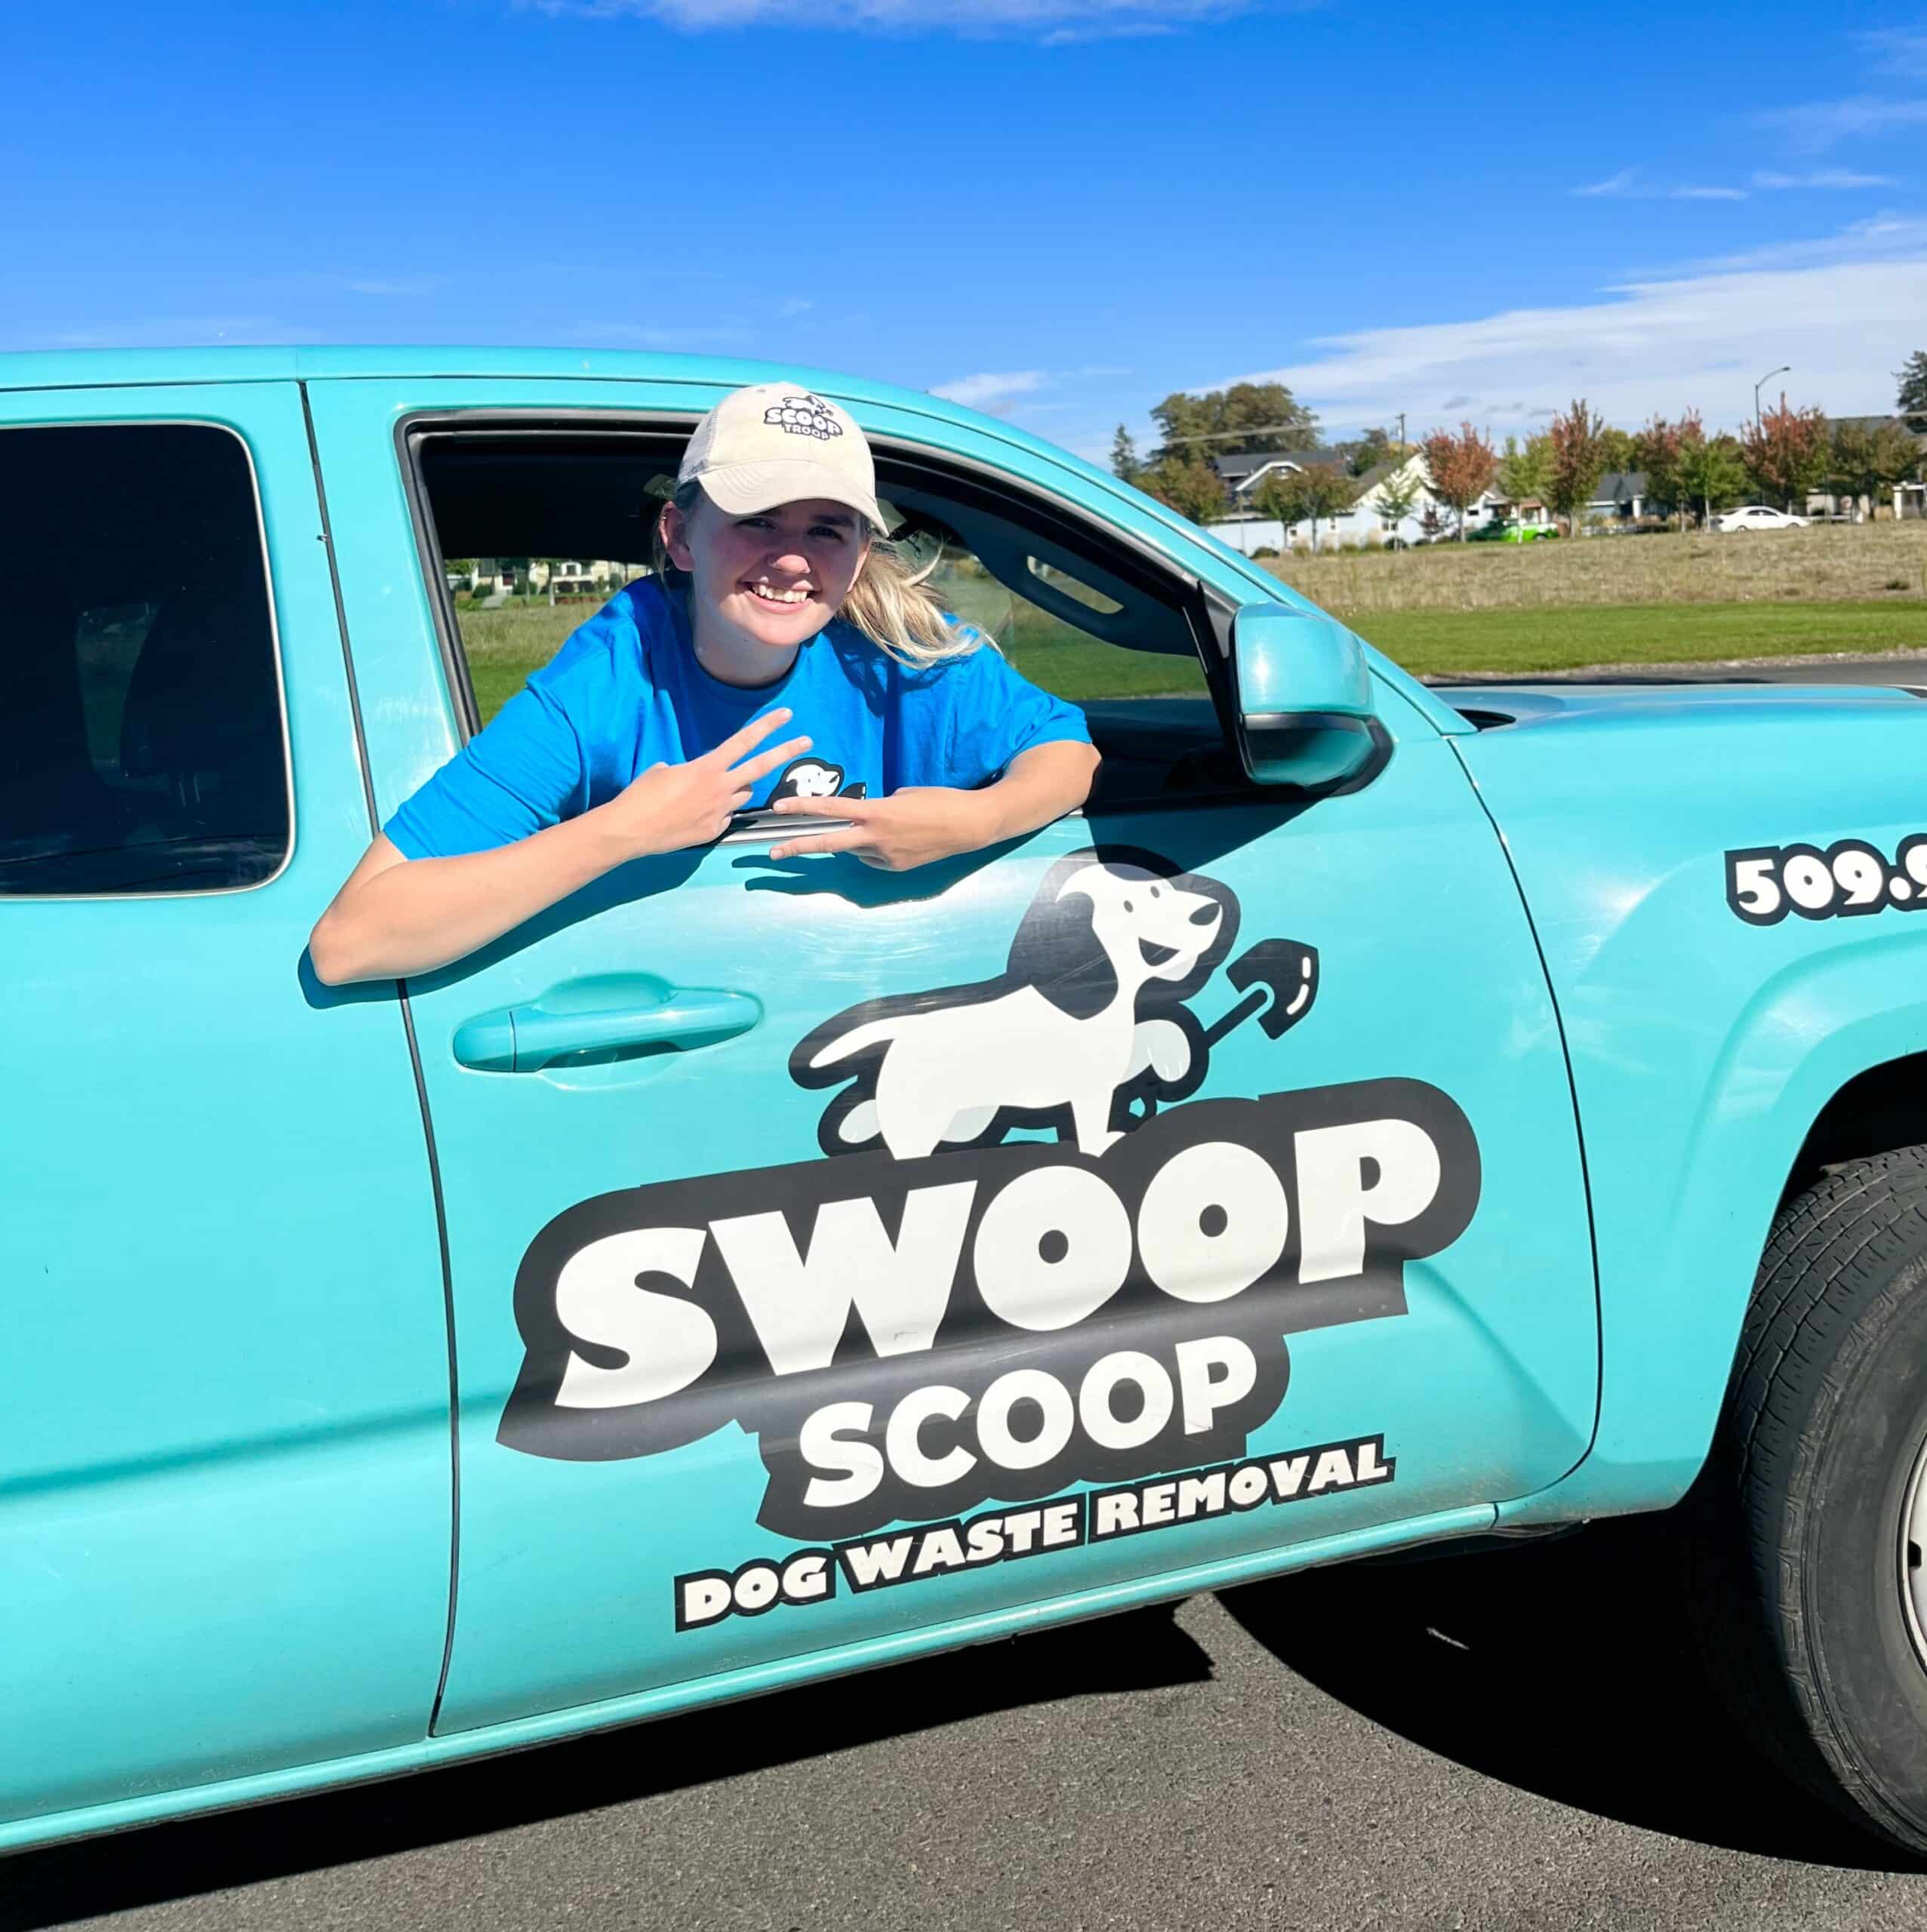 Swoop Scoop employee giving the peace sign out a truck window.